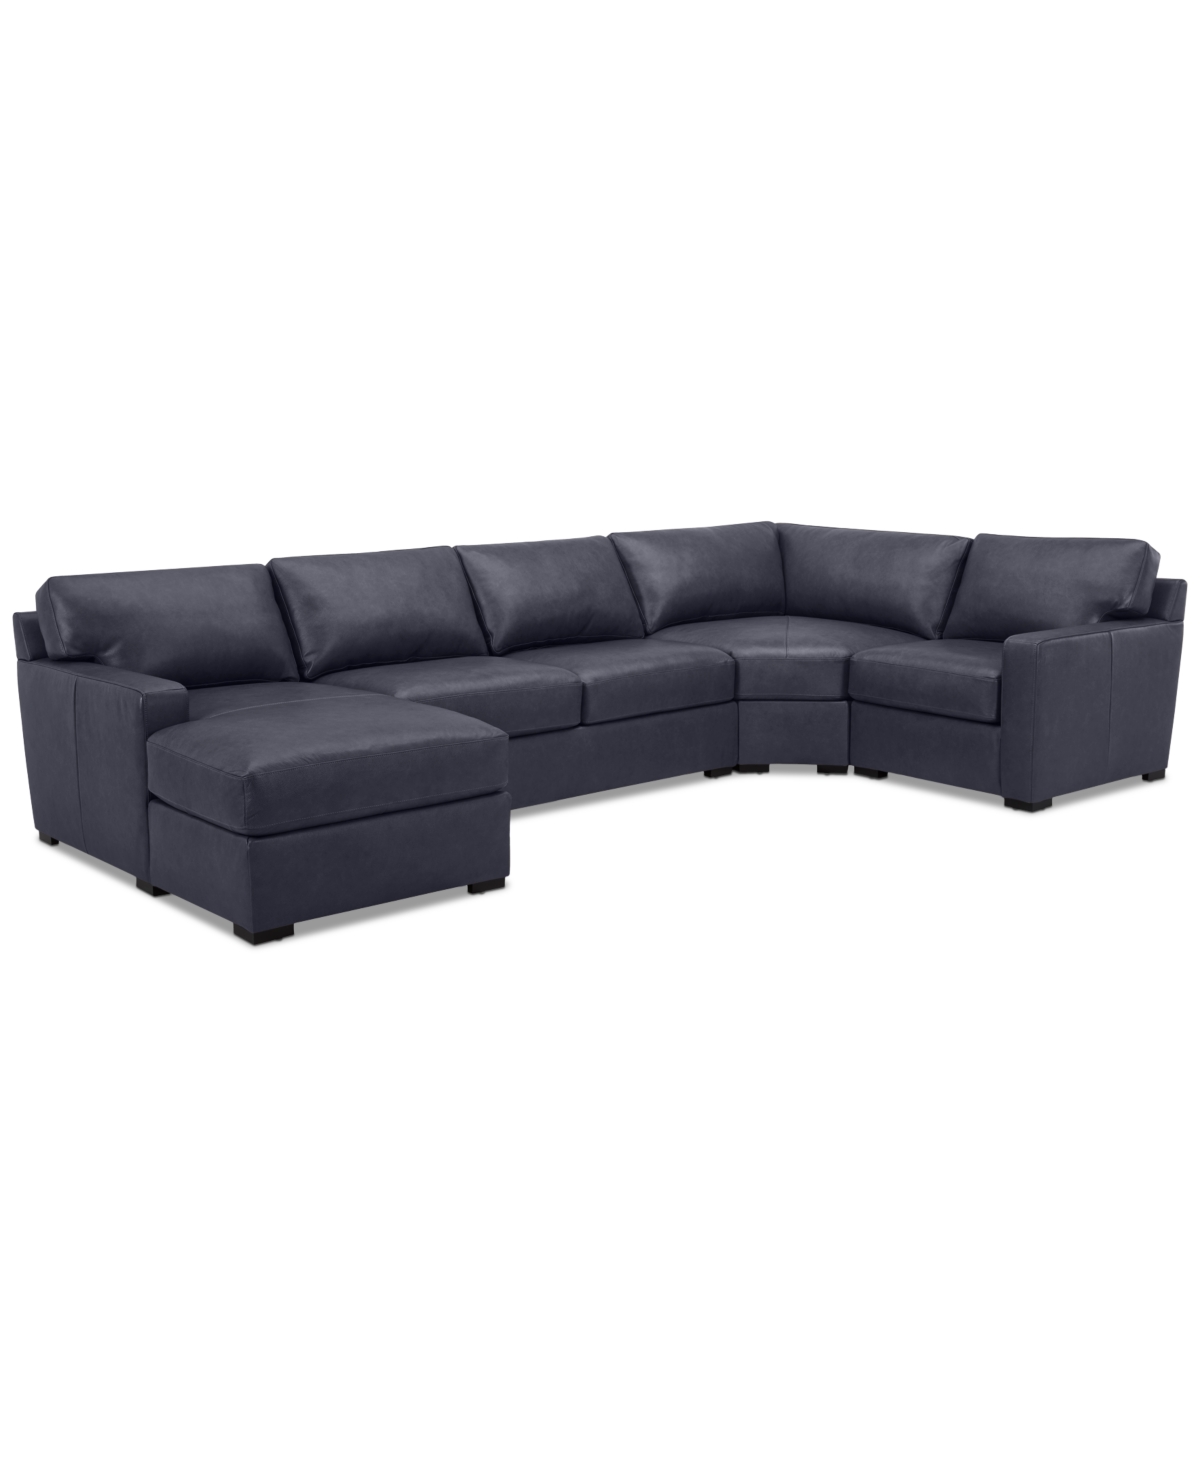 Macy's Radley 148" 4-pc. Leather Wedge Modular Chaise Sectional, Created For  In Slate Grey